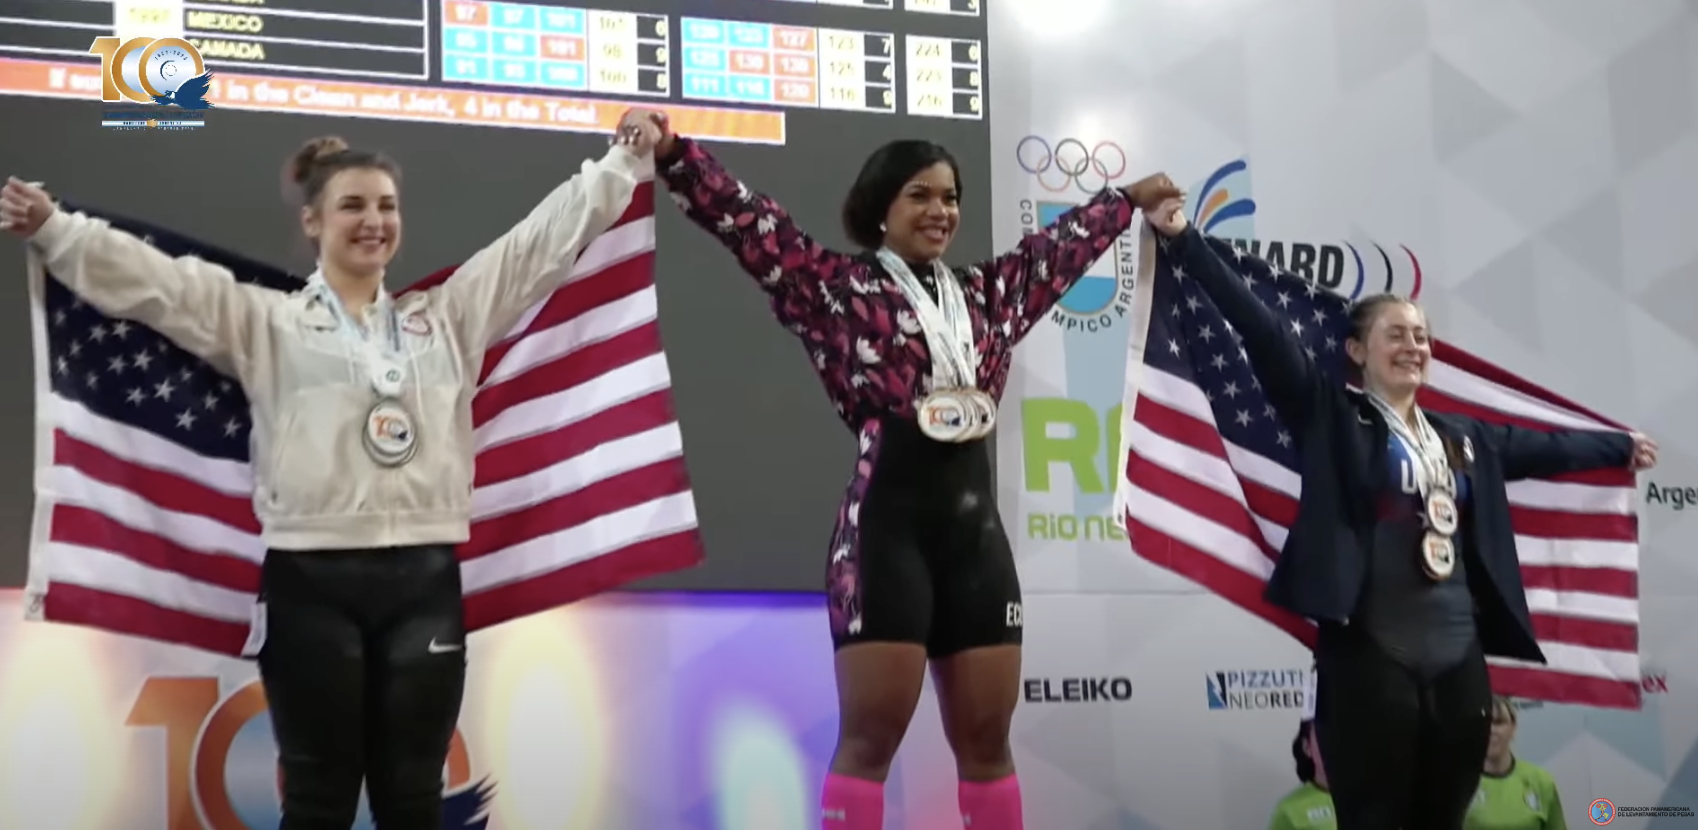 Angie Palacios from Ecuador won the women's 71kg at the Pan American Championships ©ITG